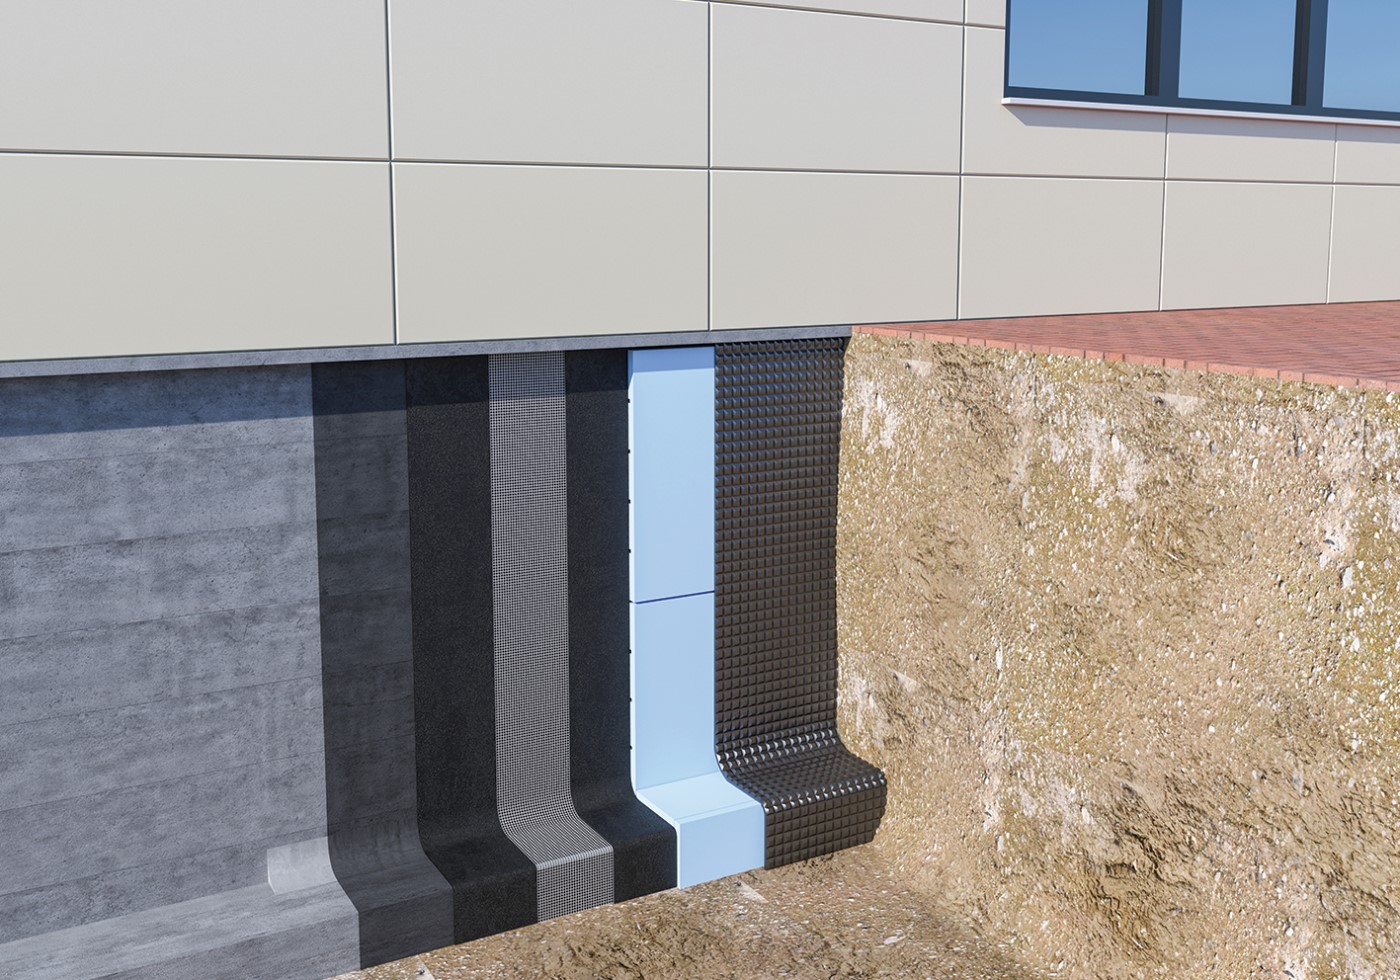 External Waterproofing Solutions for Foundation Walls